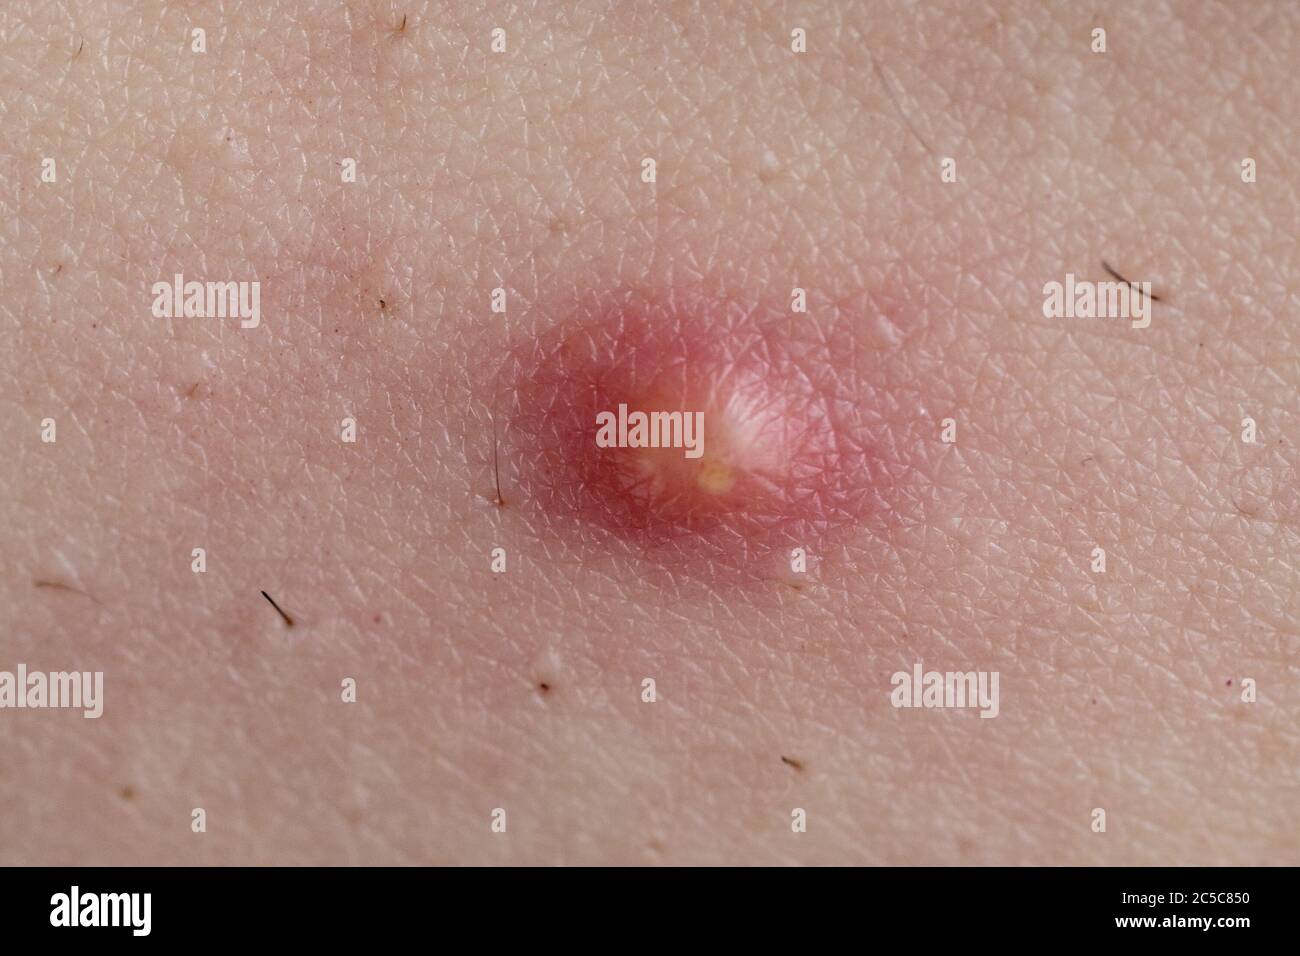 pimple on skin infection Pimple to Popping Stock Photo - Alamy